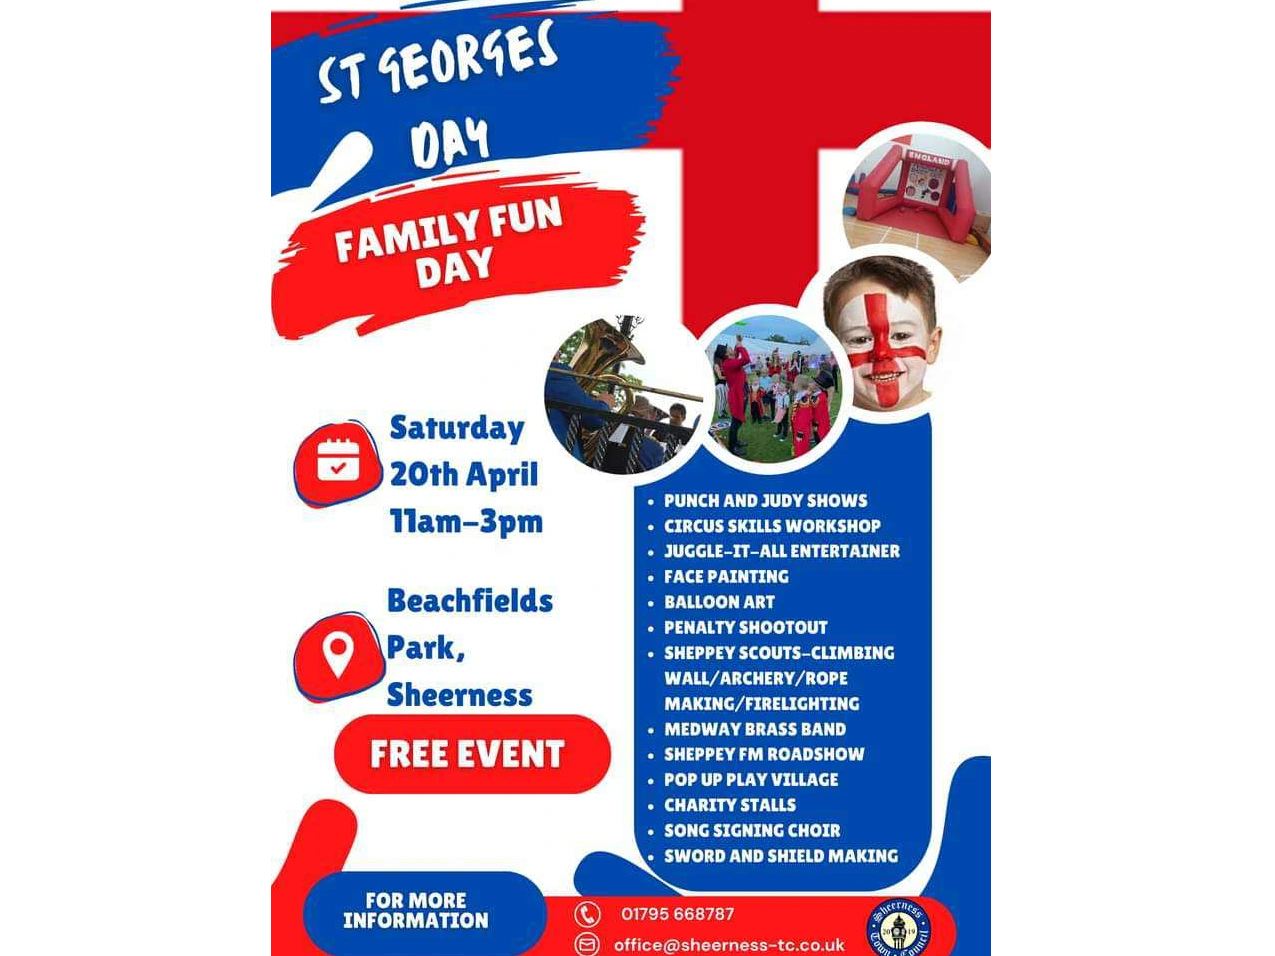 St George's Day Family Fun Day!